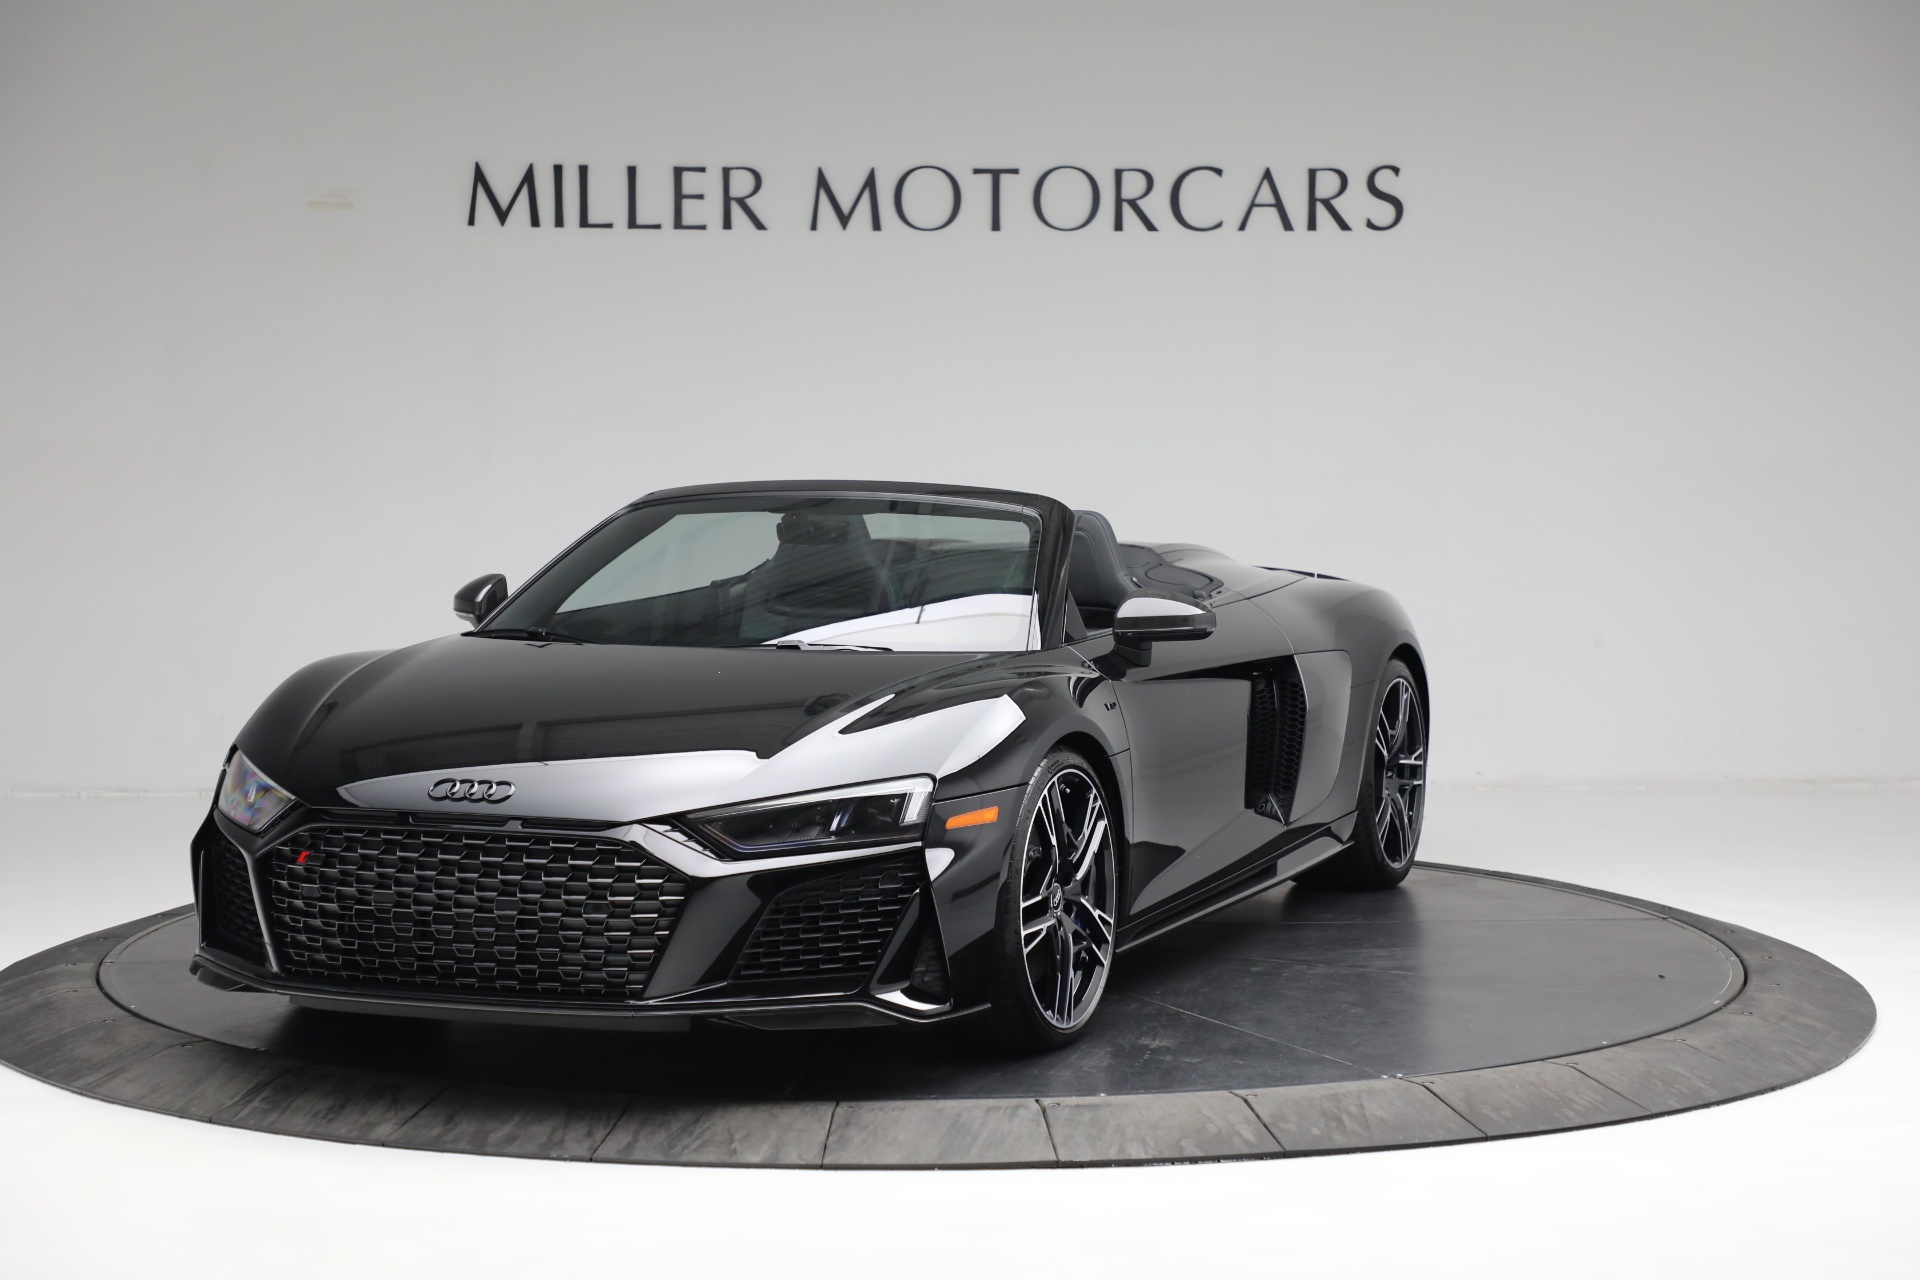 Used 2022 Audi R8 5.2 quattro V10 perform. Spyder for sale Sold at Pagani of Greenwich in Greenwich CT 06830 1